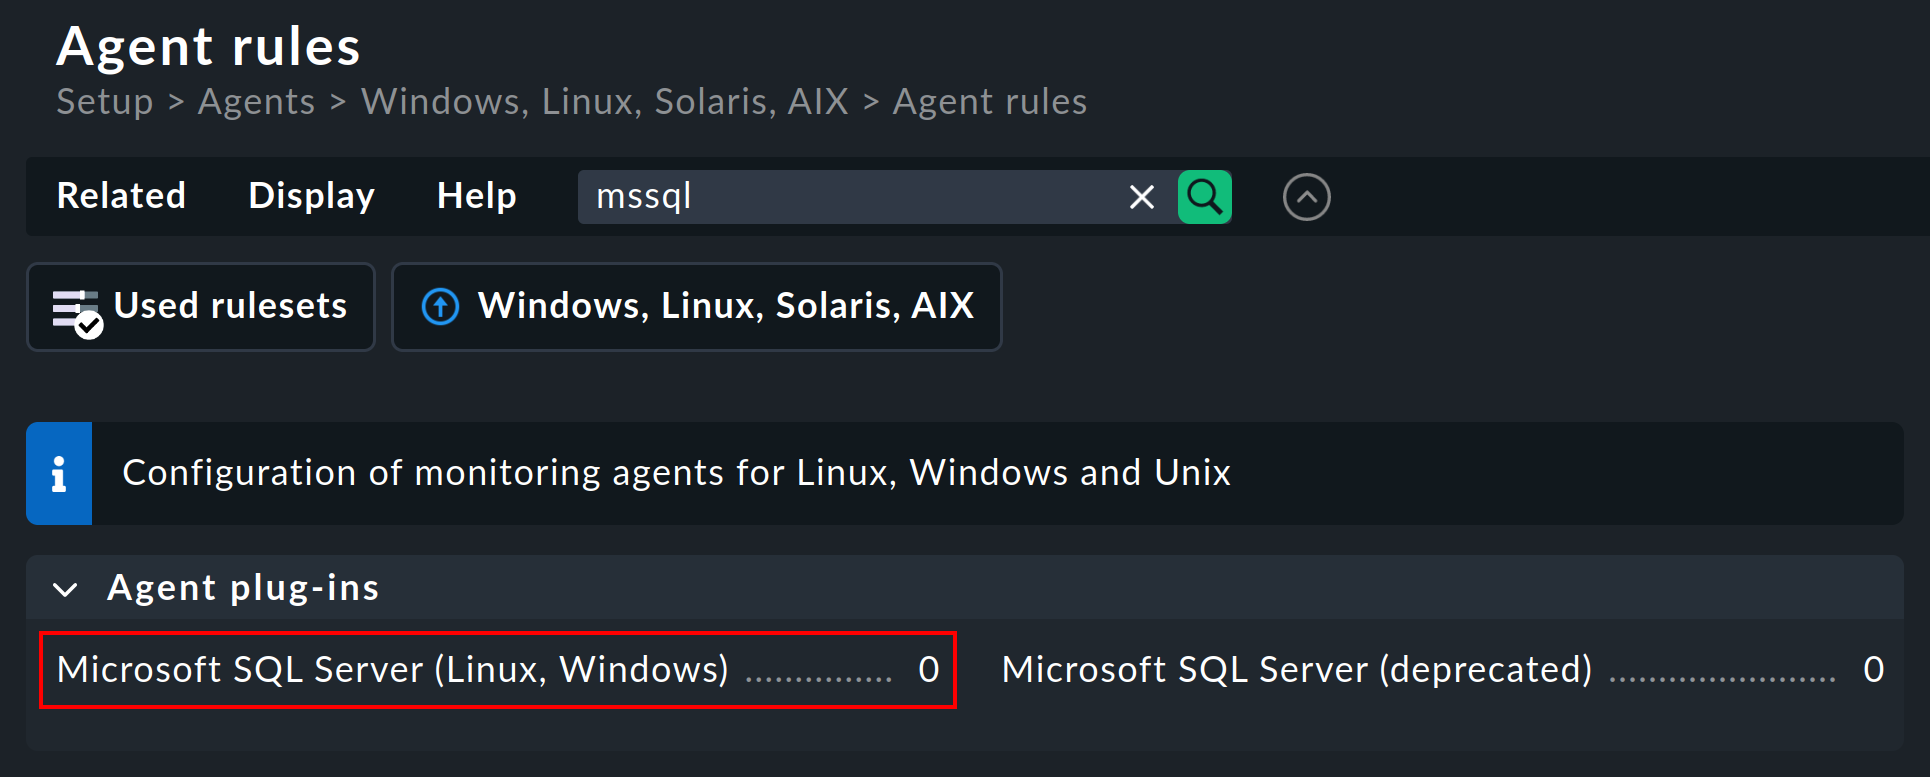 The rule 'Microsoft SQL Server (Linux, Windows)' in the agent rules.